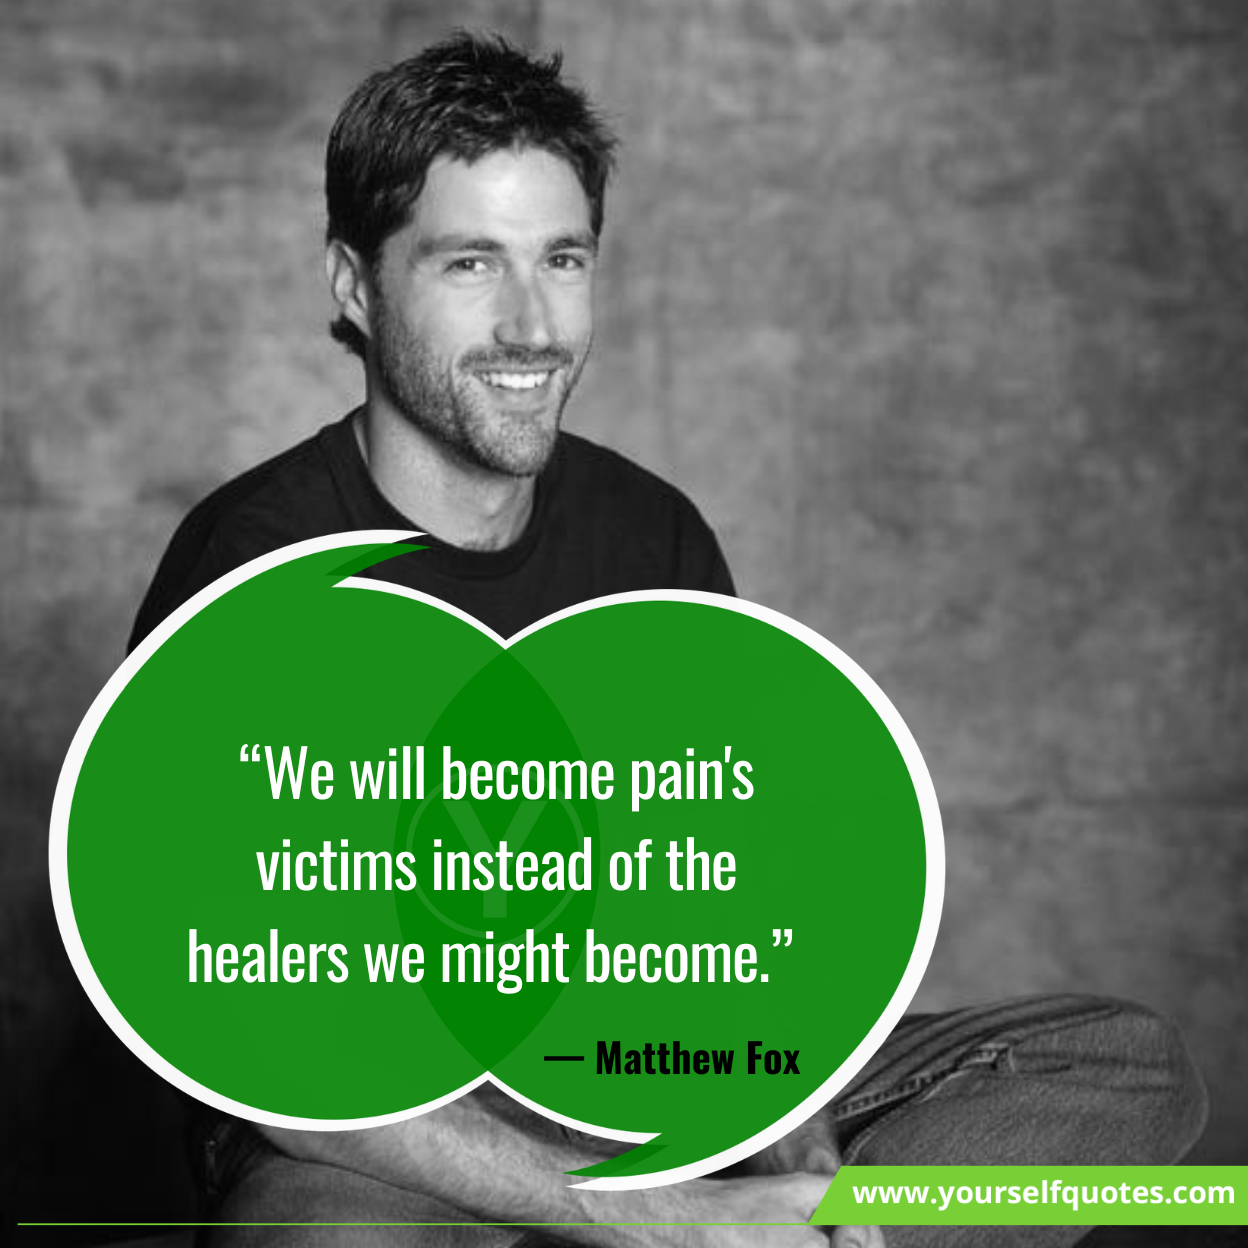 Matthew Fox Quotes About Success